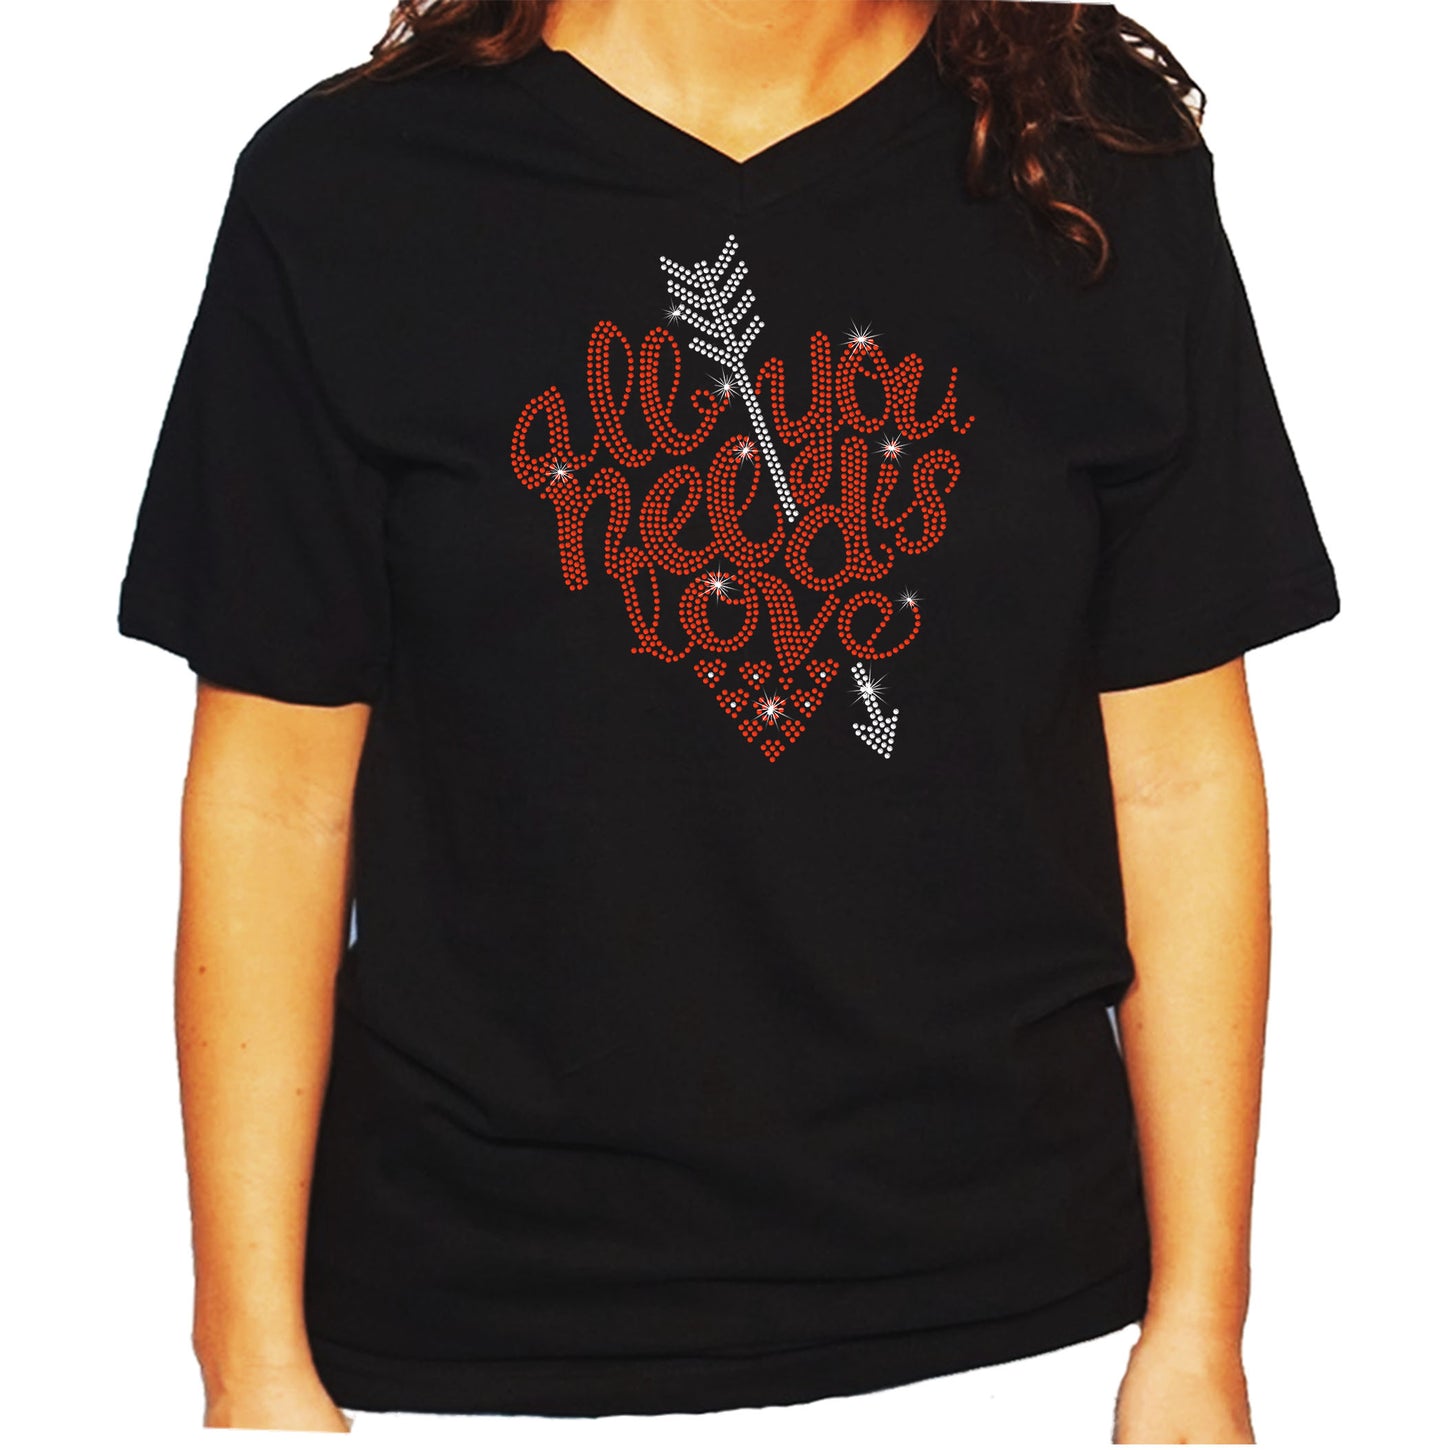 Women's/Unisex Rhinestone T-Shirt with All You Need is Love - Heart with Arrow, Valentines Shirt